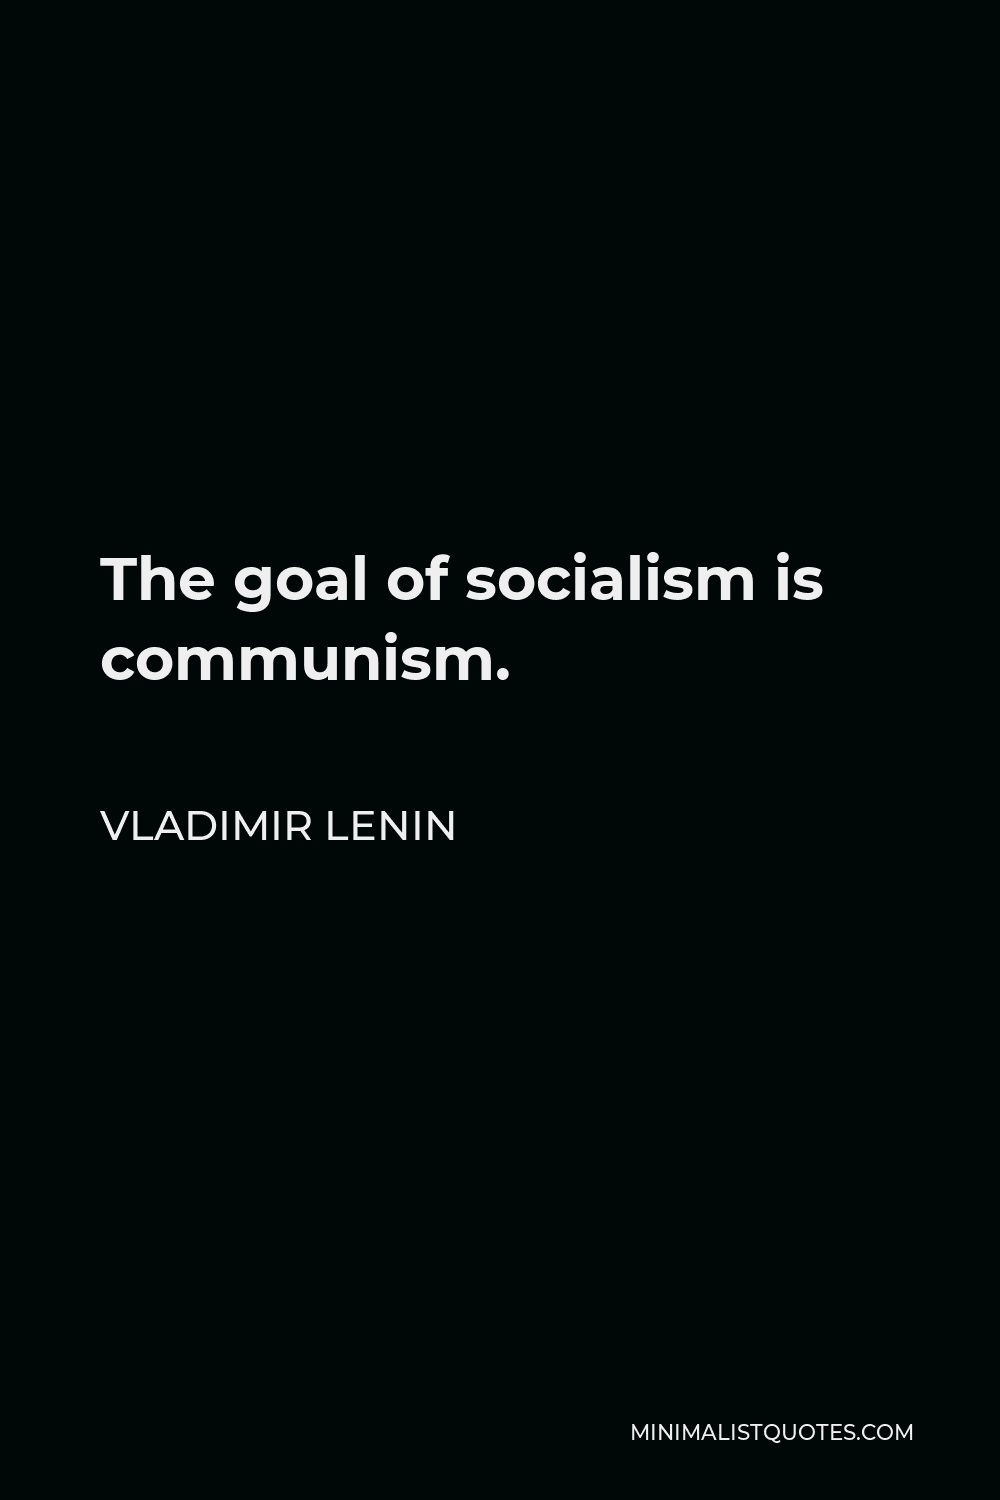 the goal of socialism is communism quote